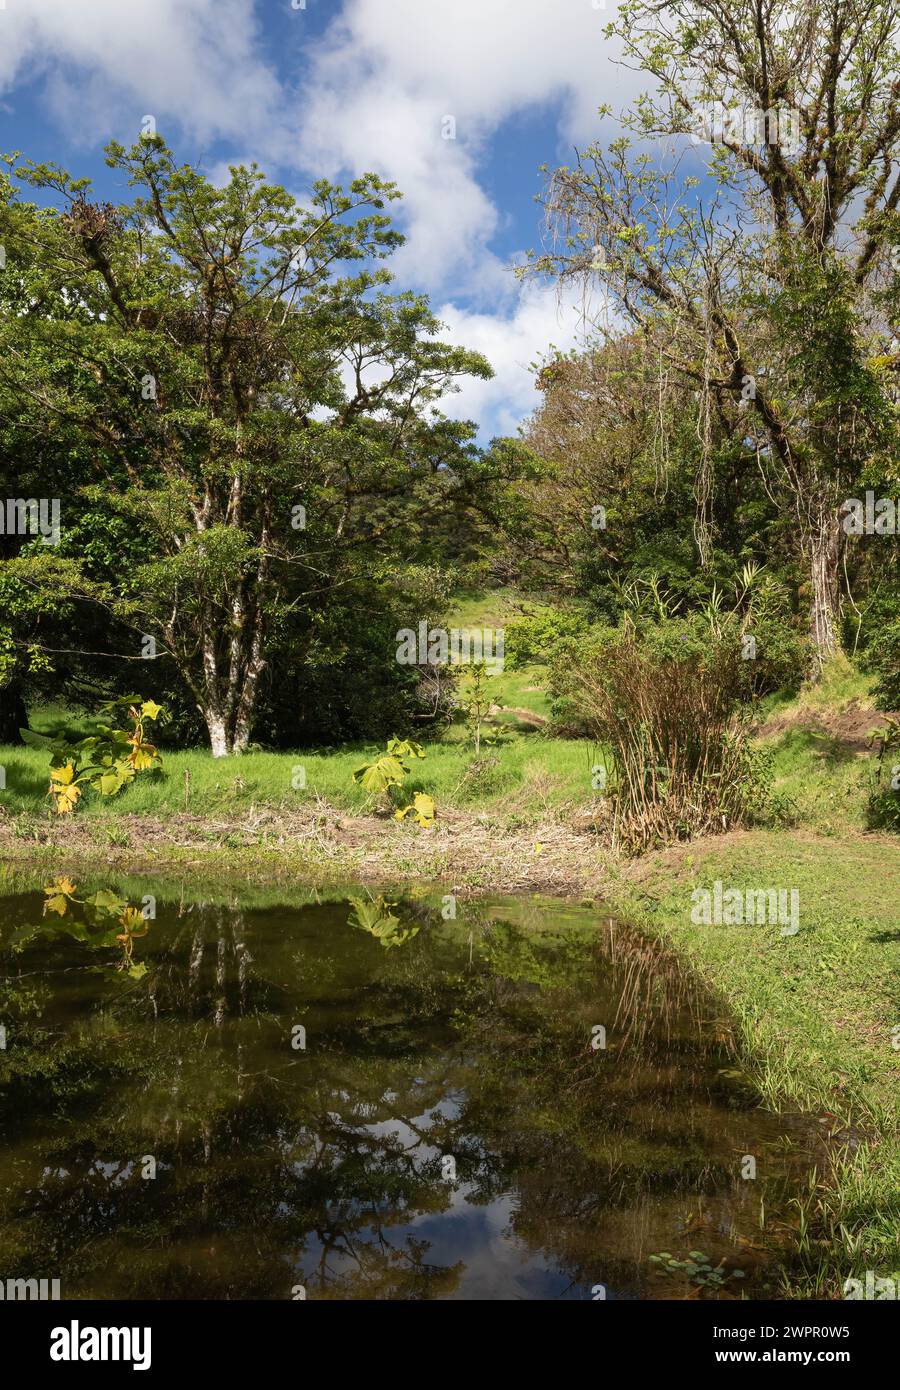 Pretty pond and tropical forest in St. Elena Costa Rica Stock Photo